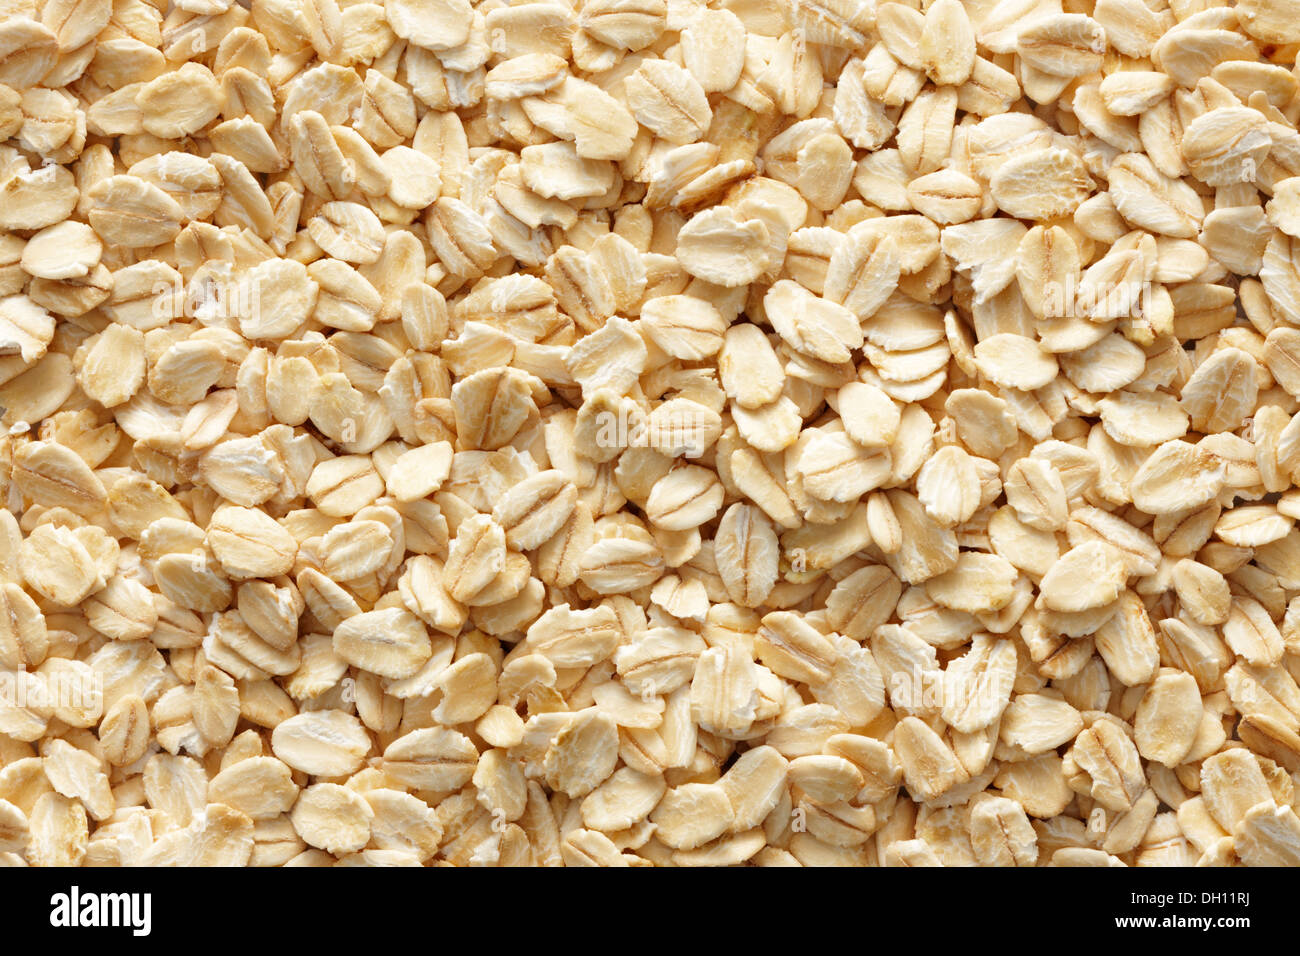 lots of oatmeals or oat flakes as background Stock Photo